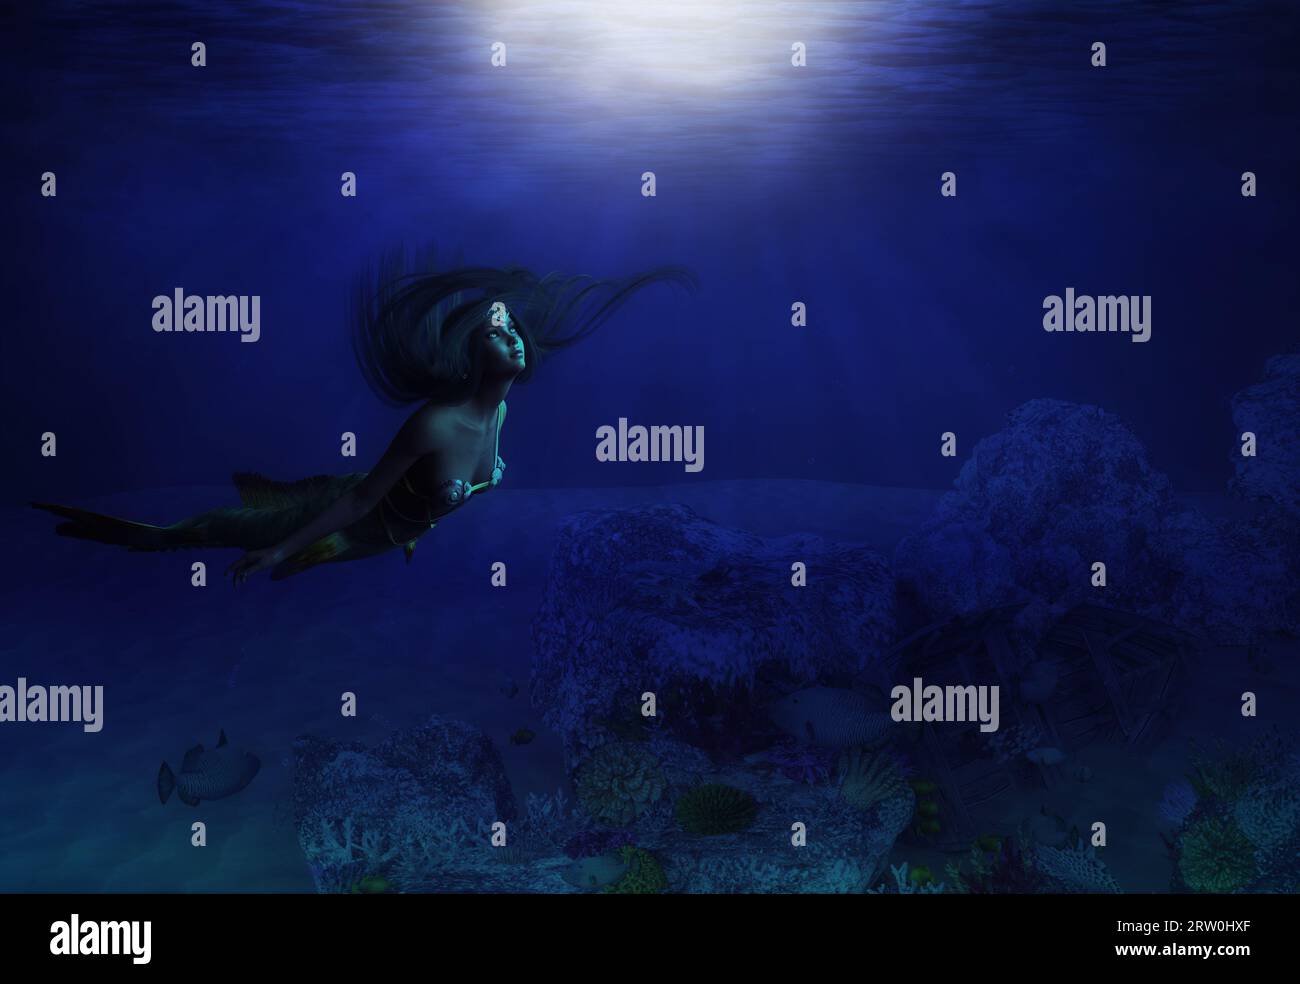 Dark underwater scene with coral reef and mermaid, 3D Illustration. Stock Photo